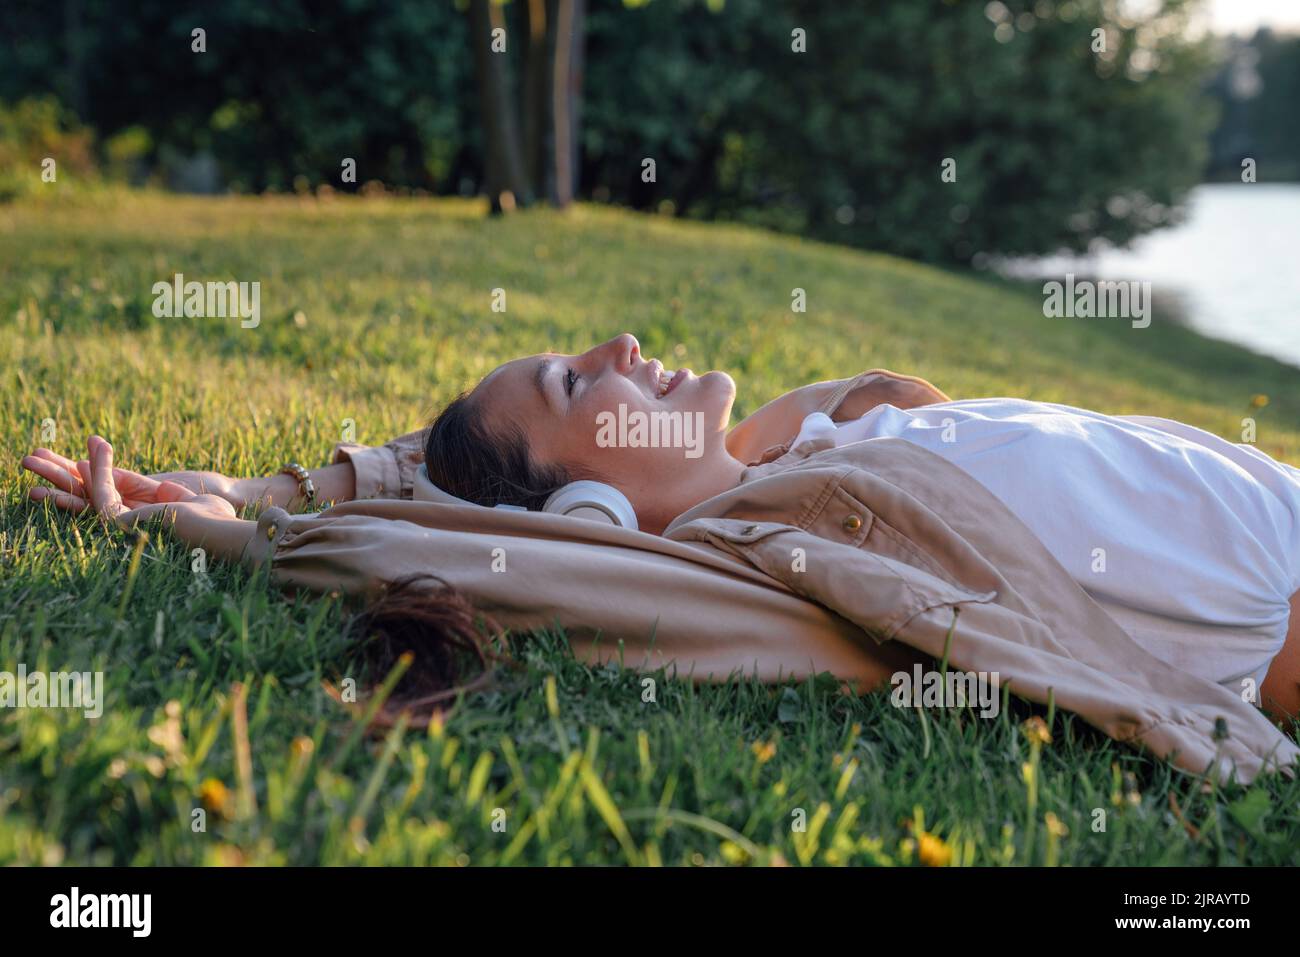 Smiling woman lying down on grass at park Stock Photo